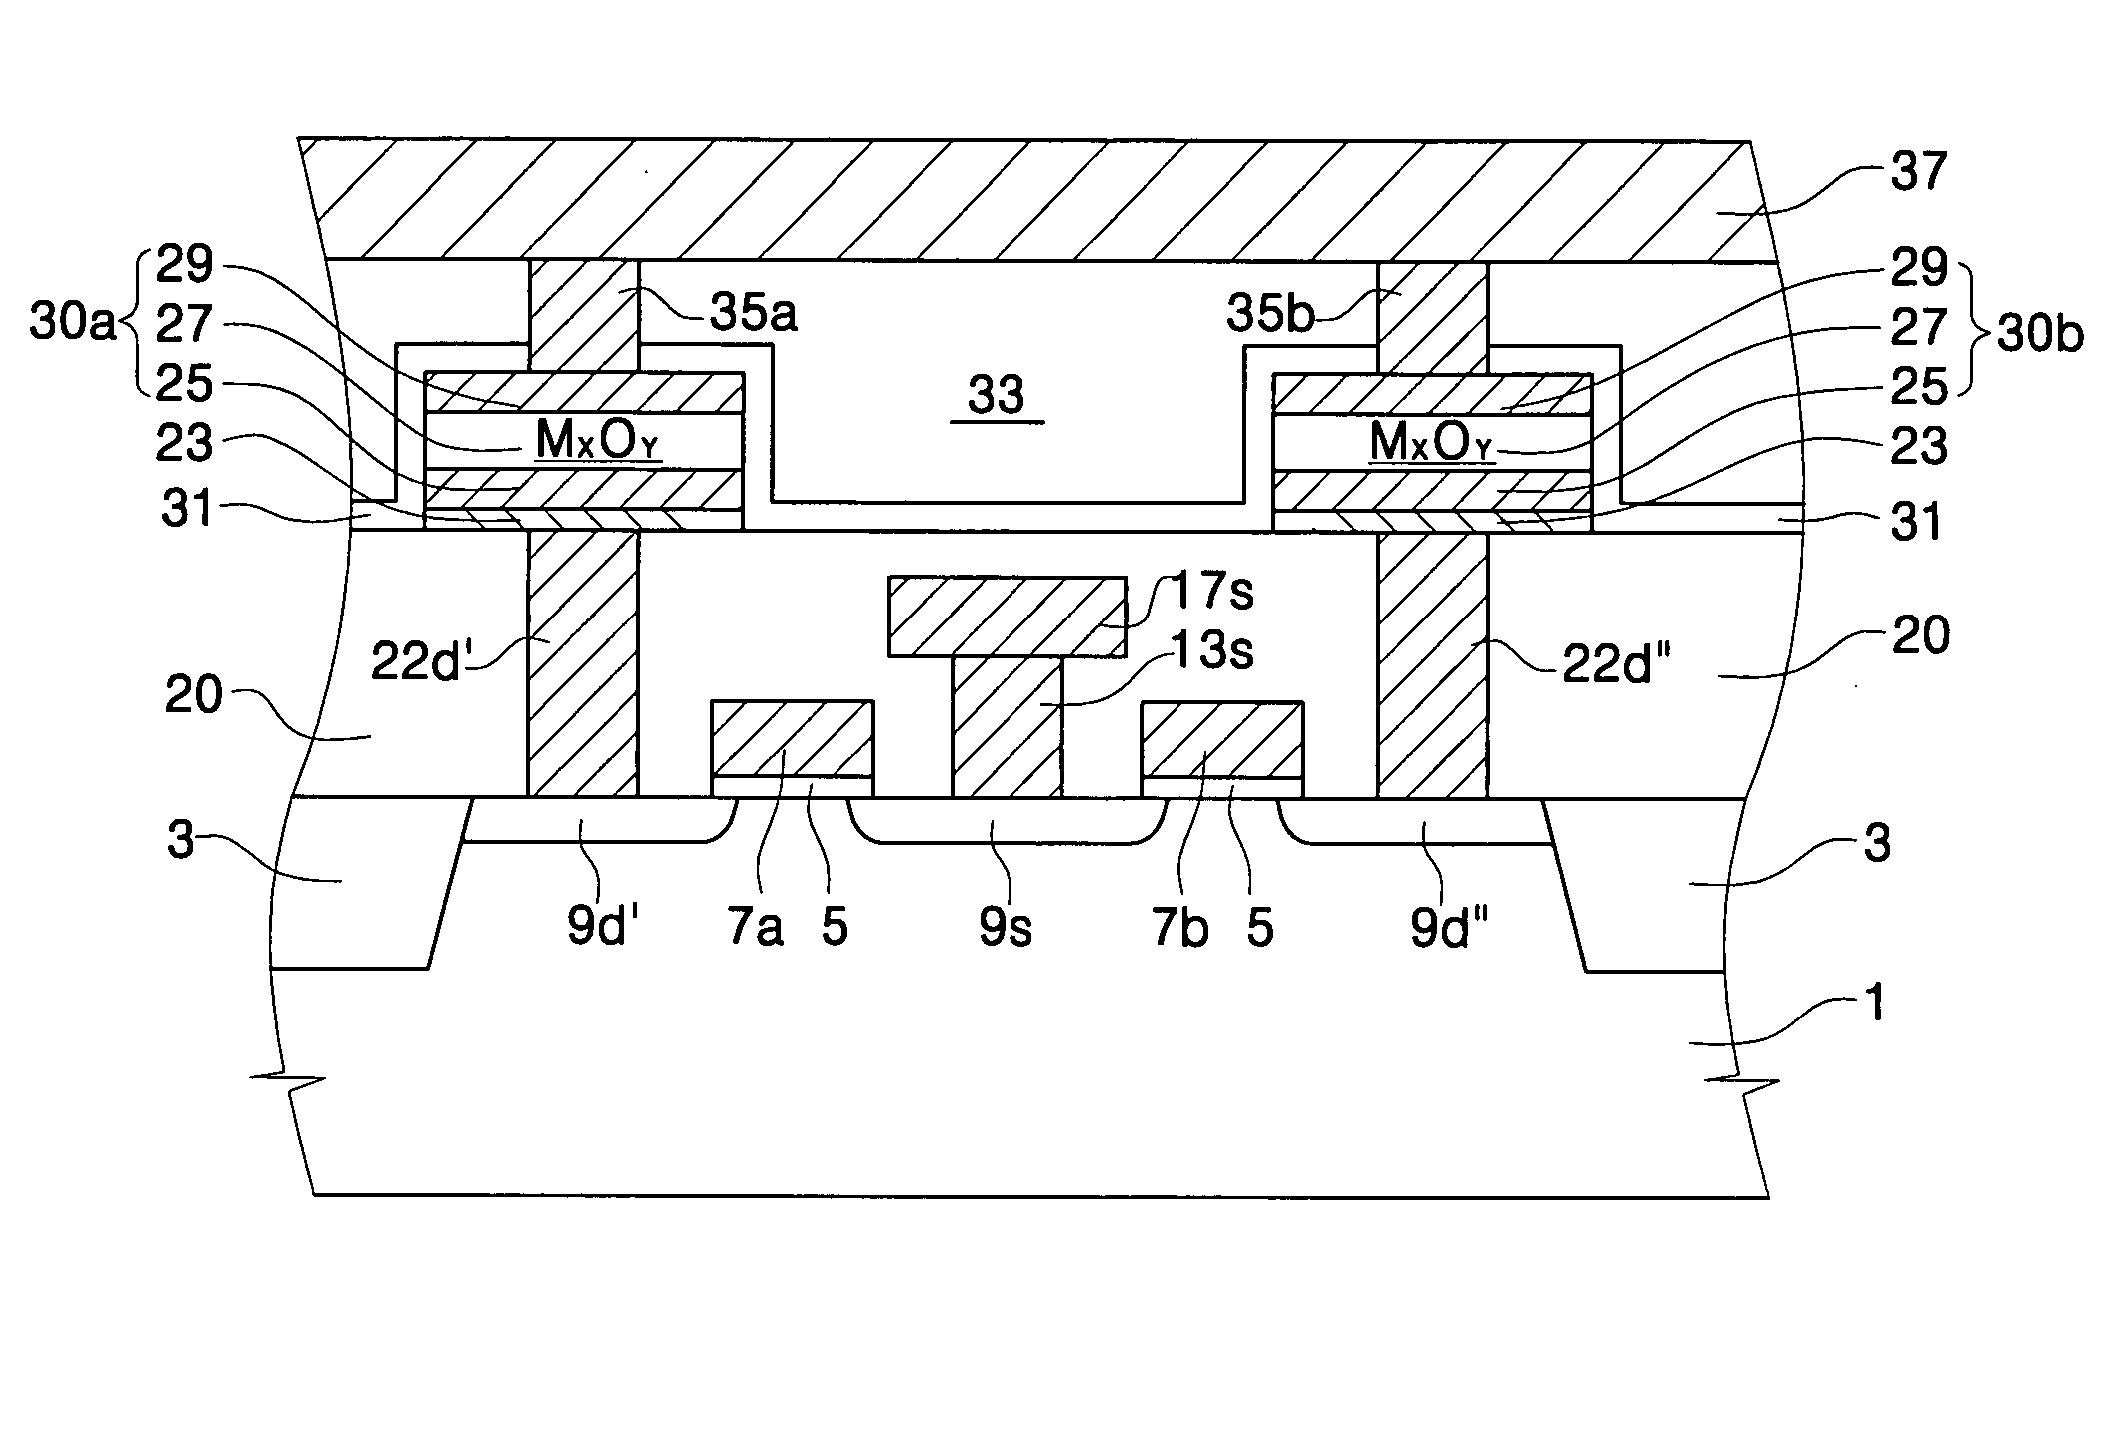 Non-volatile memory cells employing a transition metal oxide layer as a data storage material layer and methods of manufacturing the same